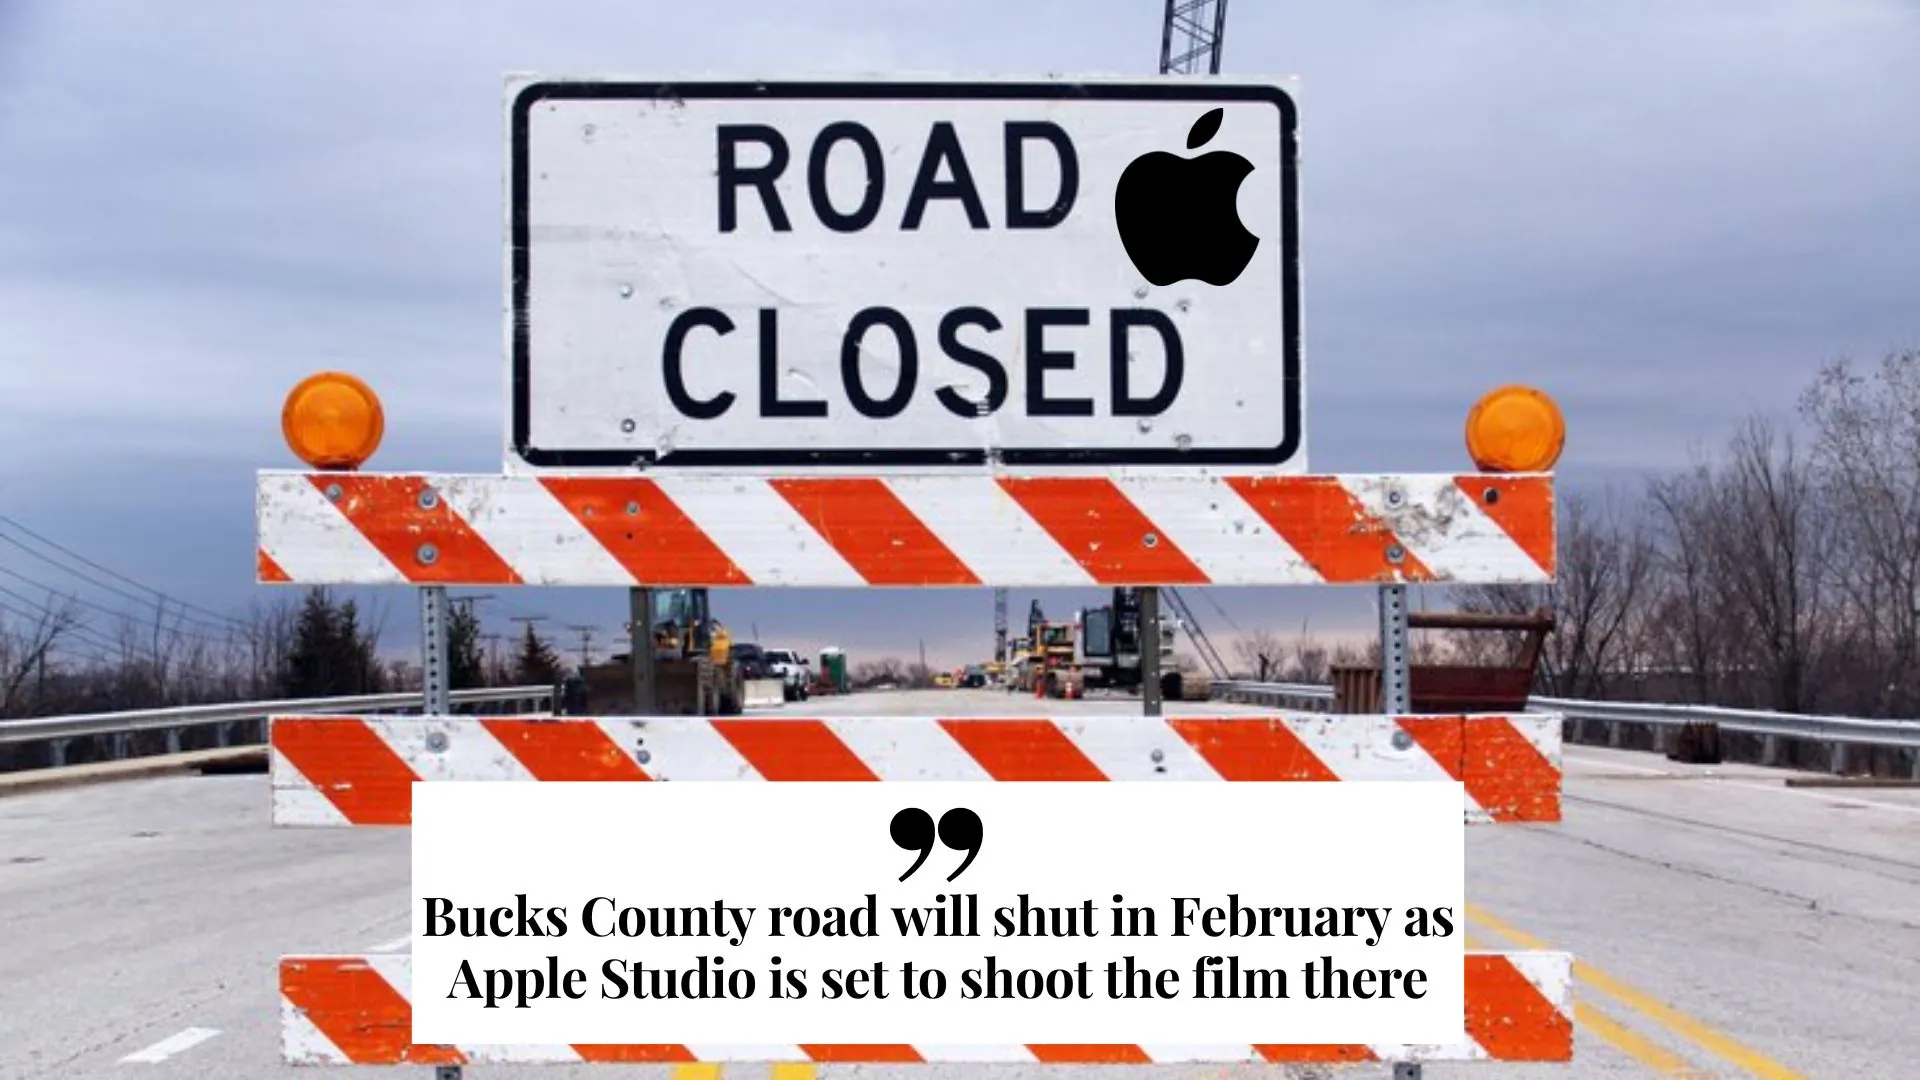 Bucks County road will shut in February as Apple Studio is set to shoot the film there (Image credit: phillyvoice)